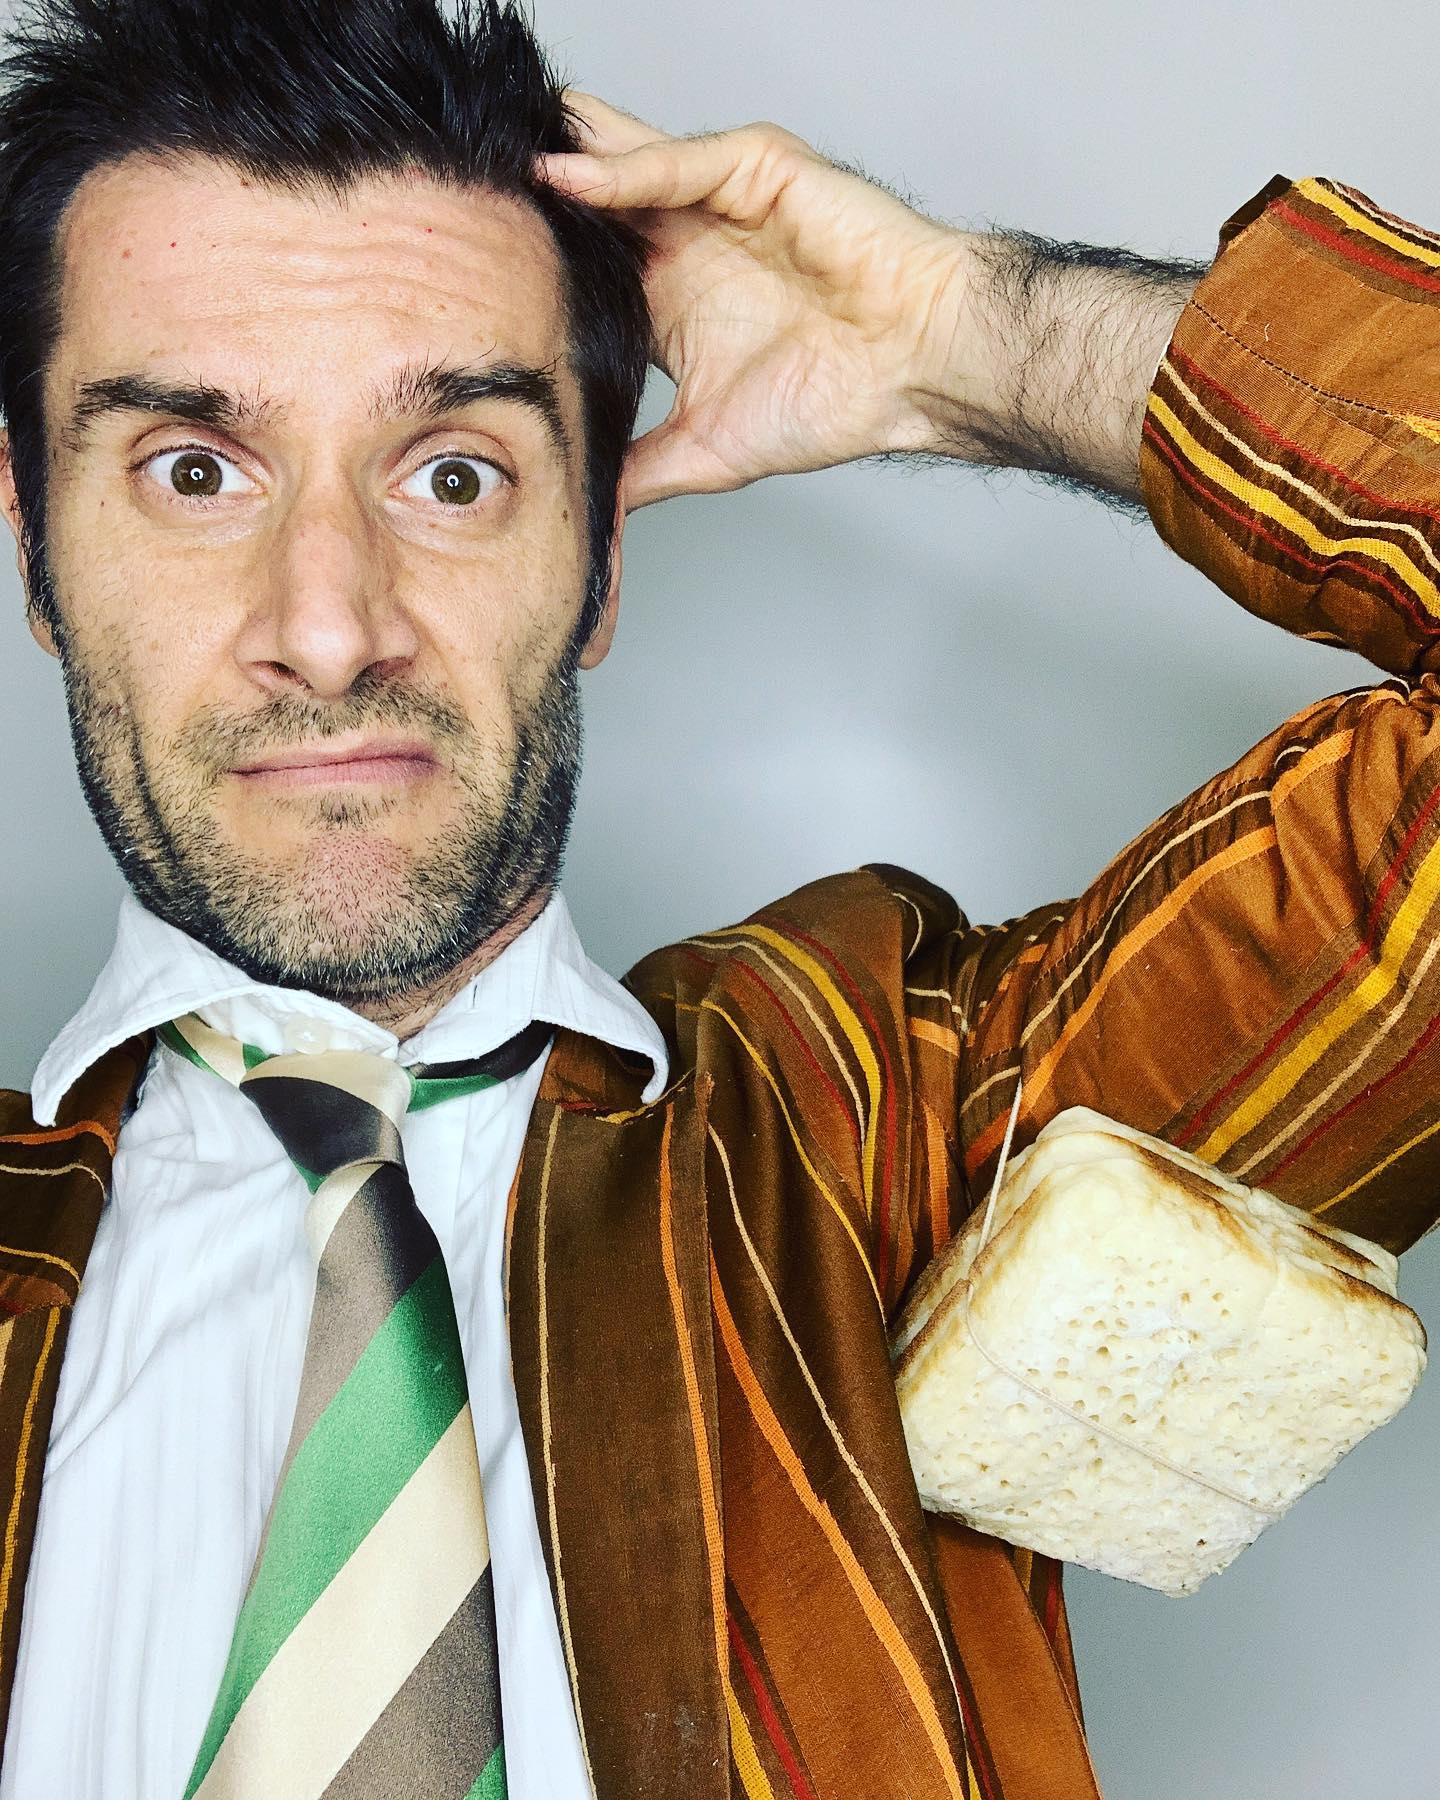 Have you heard of Mr Snotbottom? He’s THE kids comedian to see this Summer Hols!